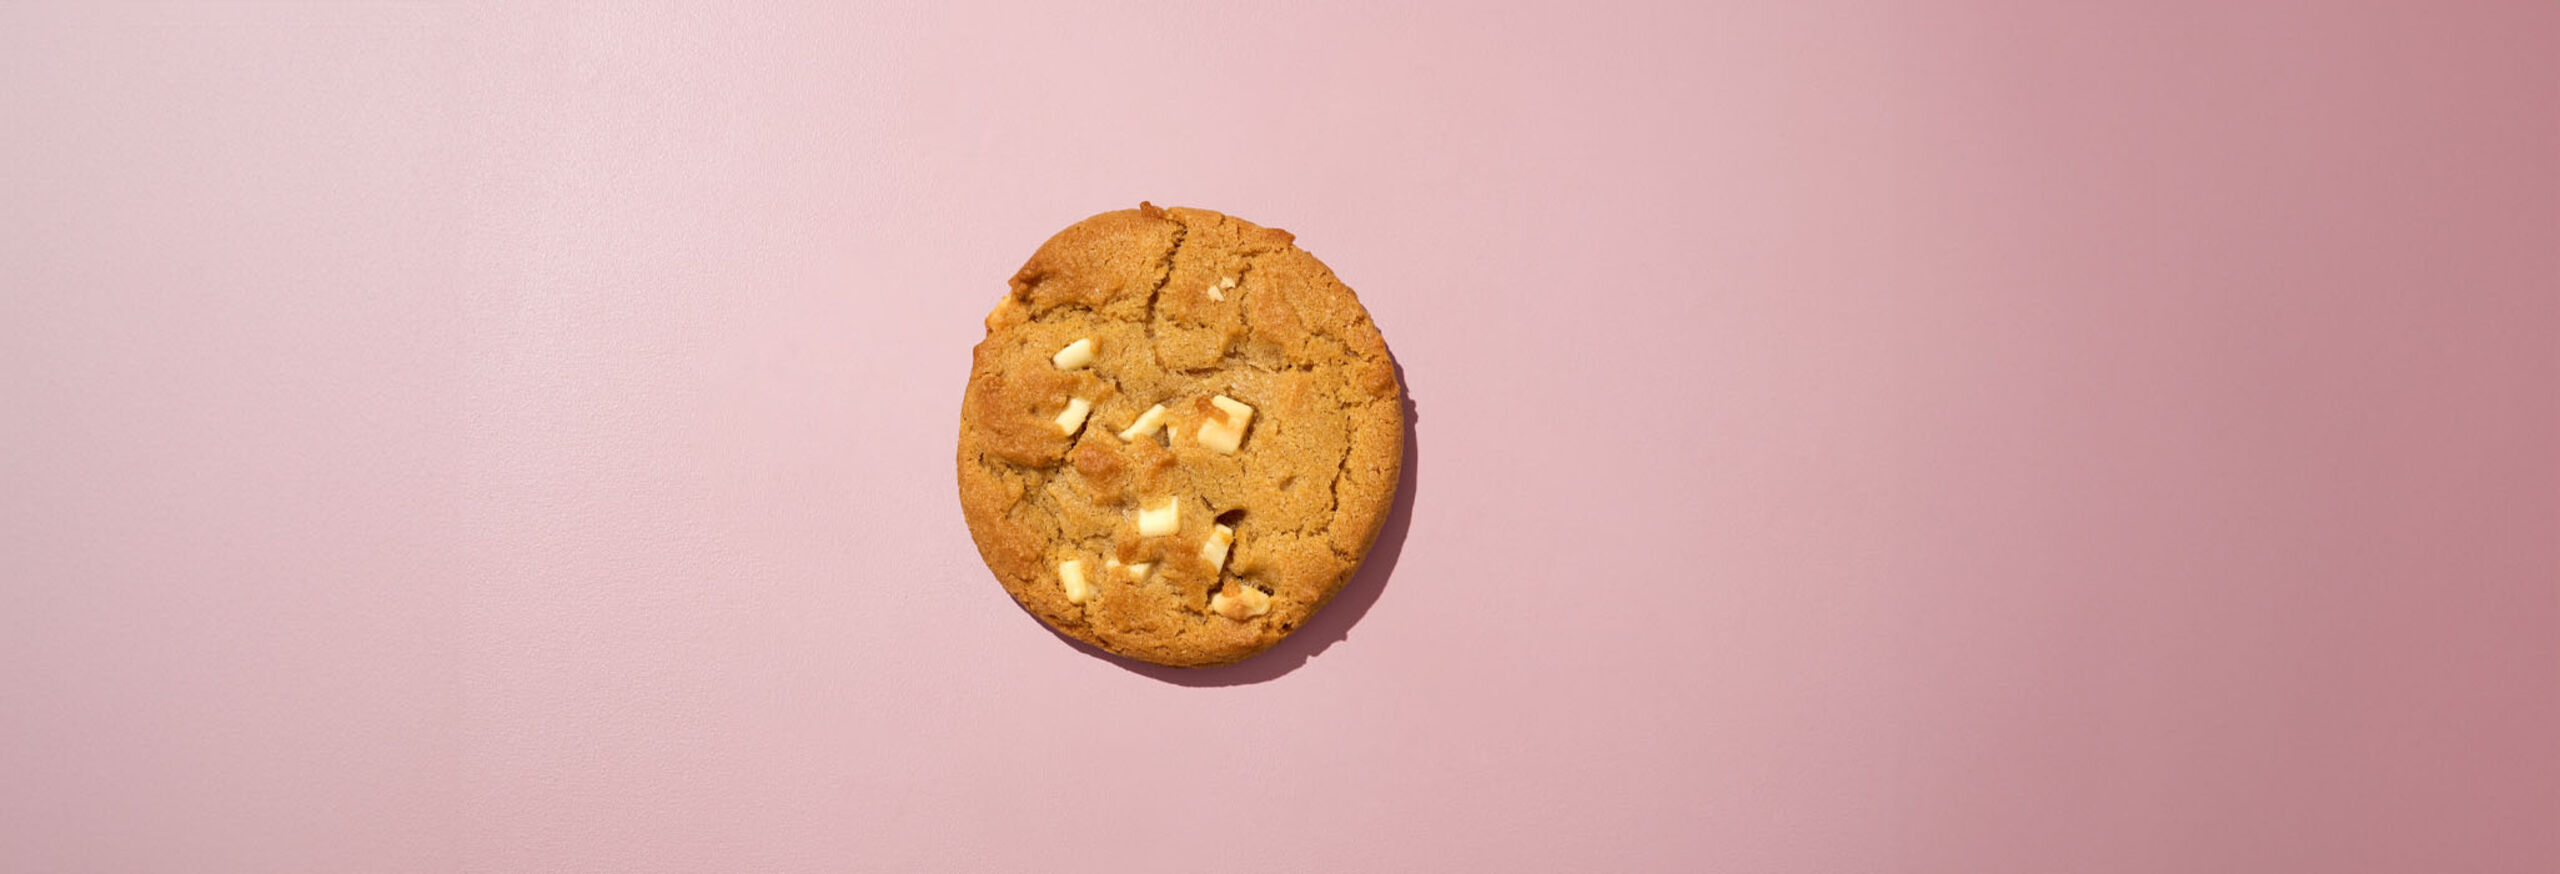 21050000_Moodfoto_Cookie Witte Chocolade